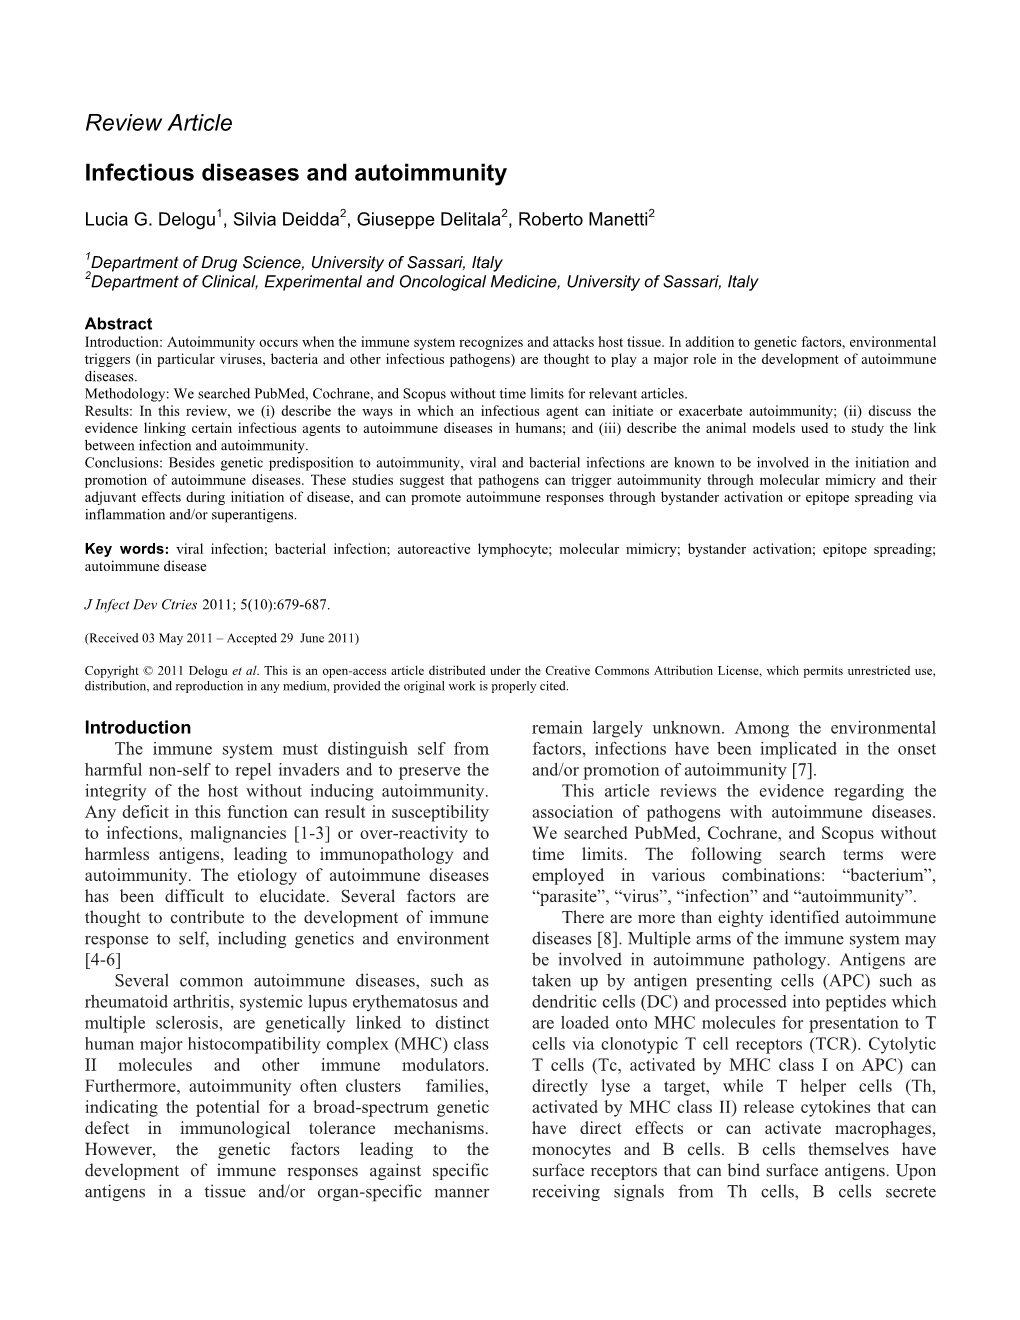 Review Article Infectious Diseases and Autoimmunity